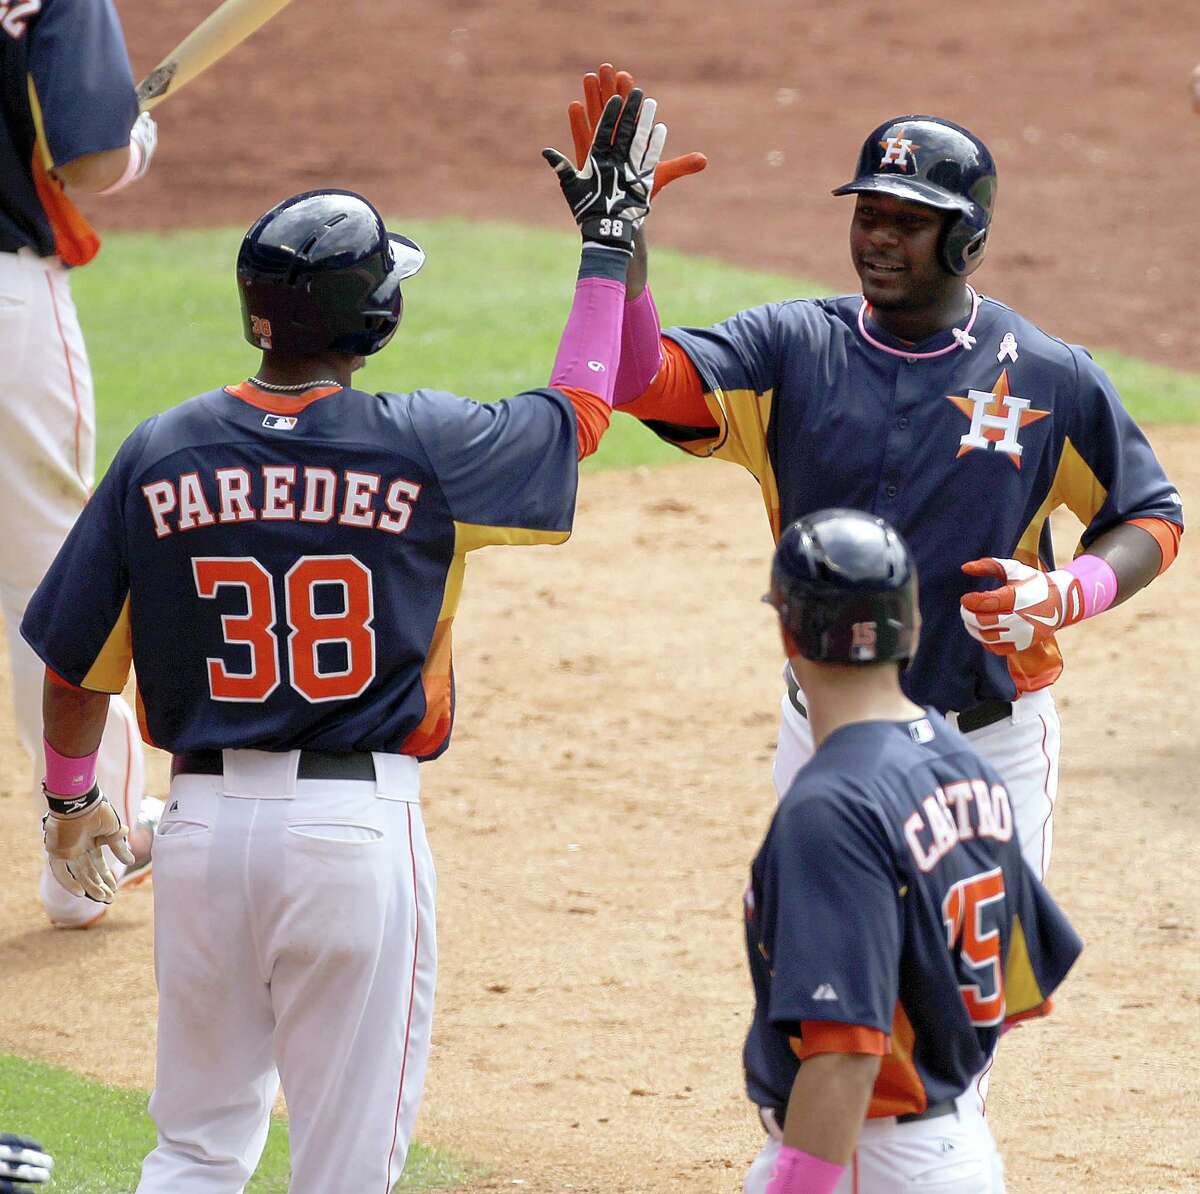 Chris Carter leads the team in post-home-run high fives.